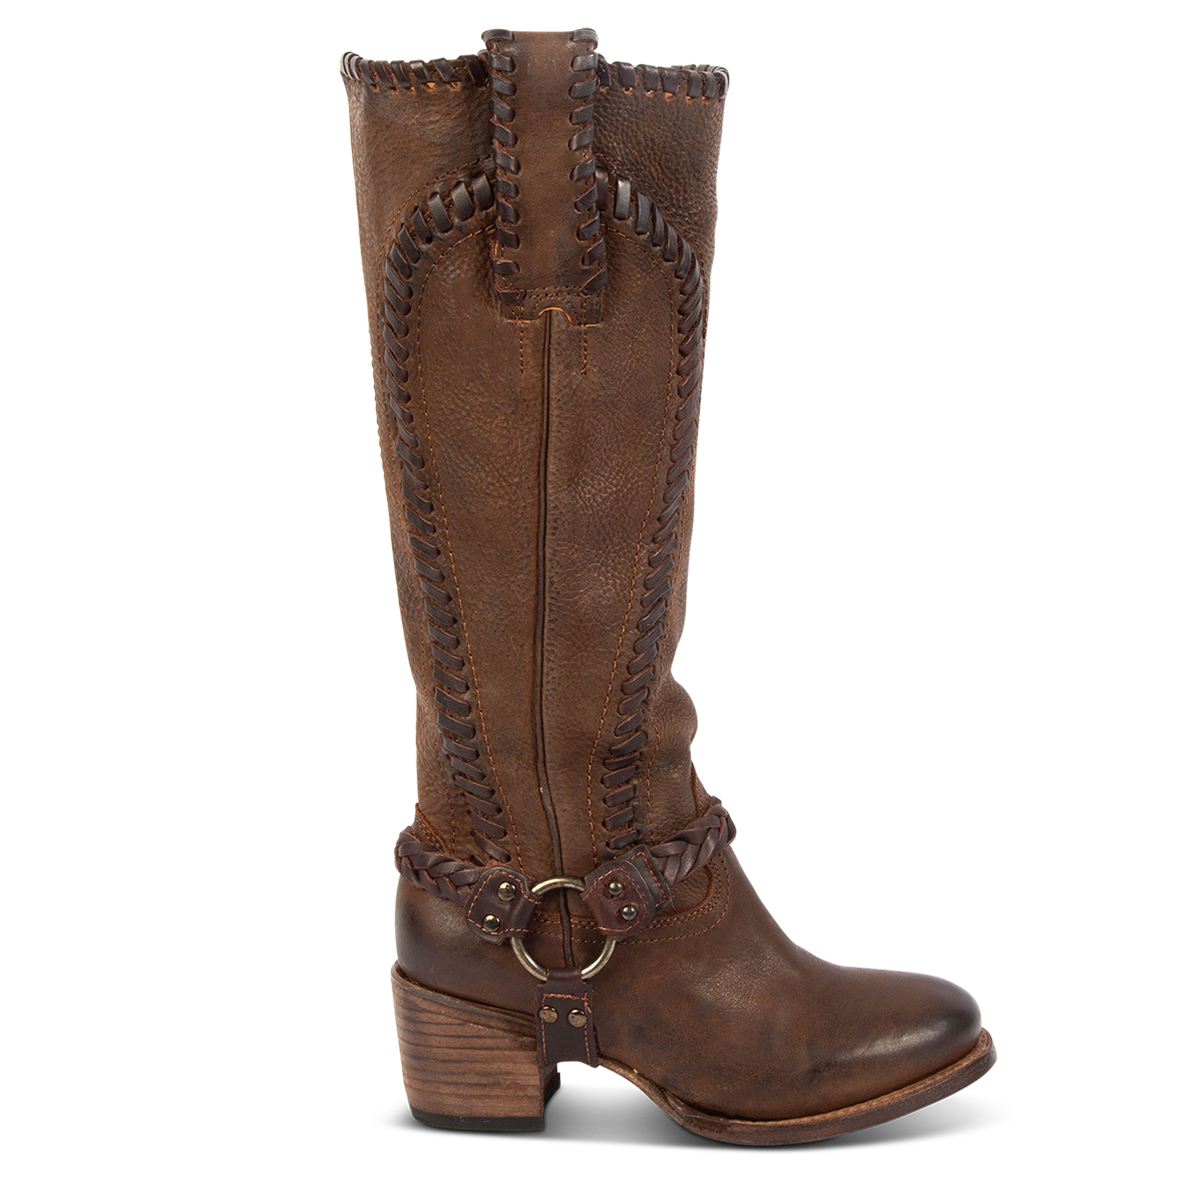 FREEBIRD women's Clover brown leather boot with whip stitch detailing, inside half zip closure and braided ankle harness